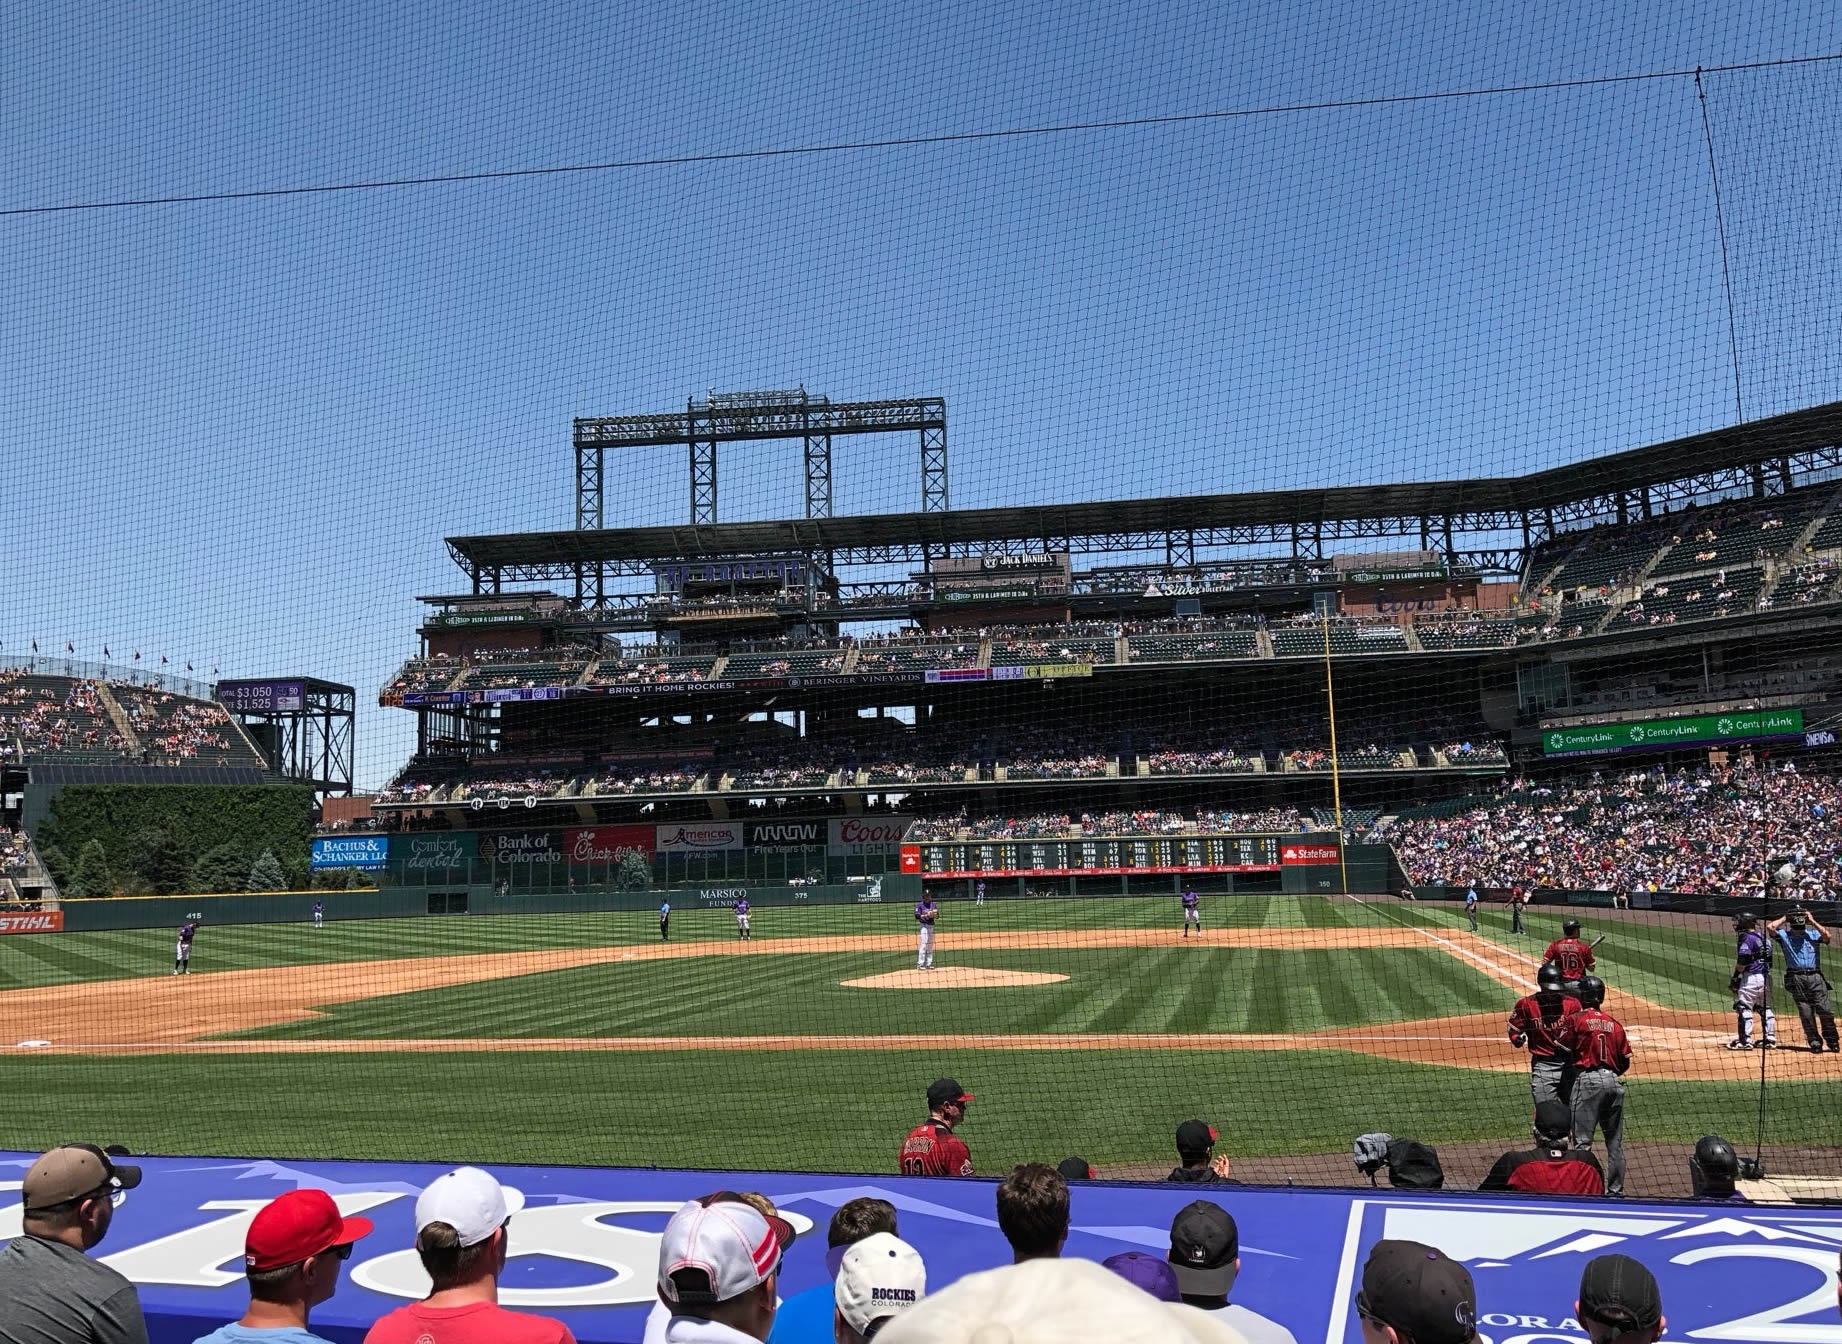 Mile high baseball: A review of Coors Field – Section 411